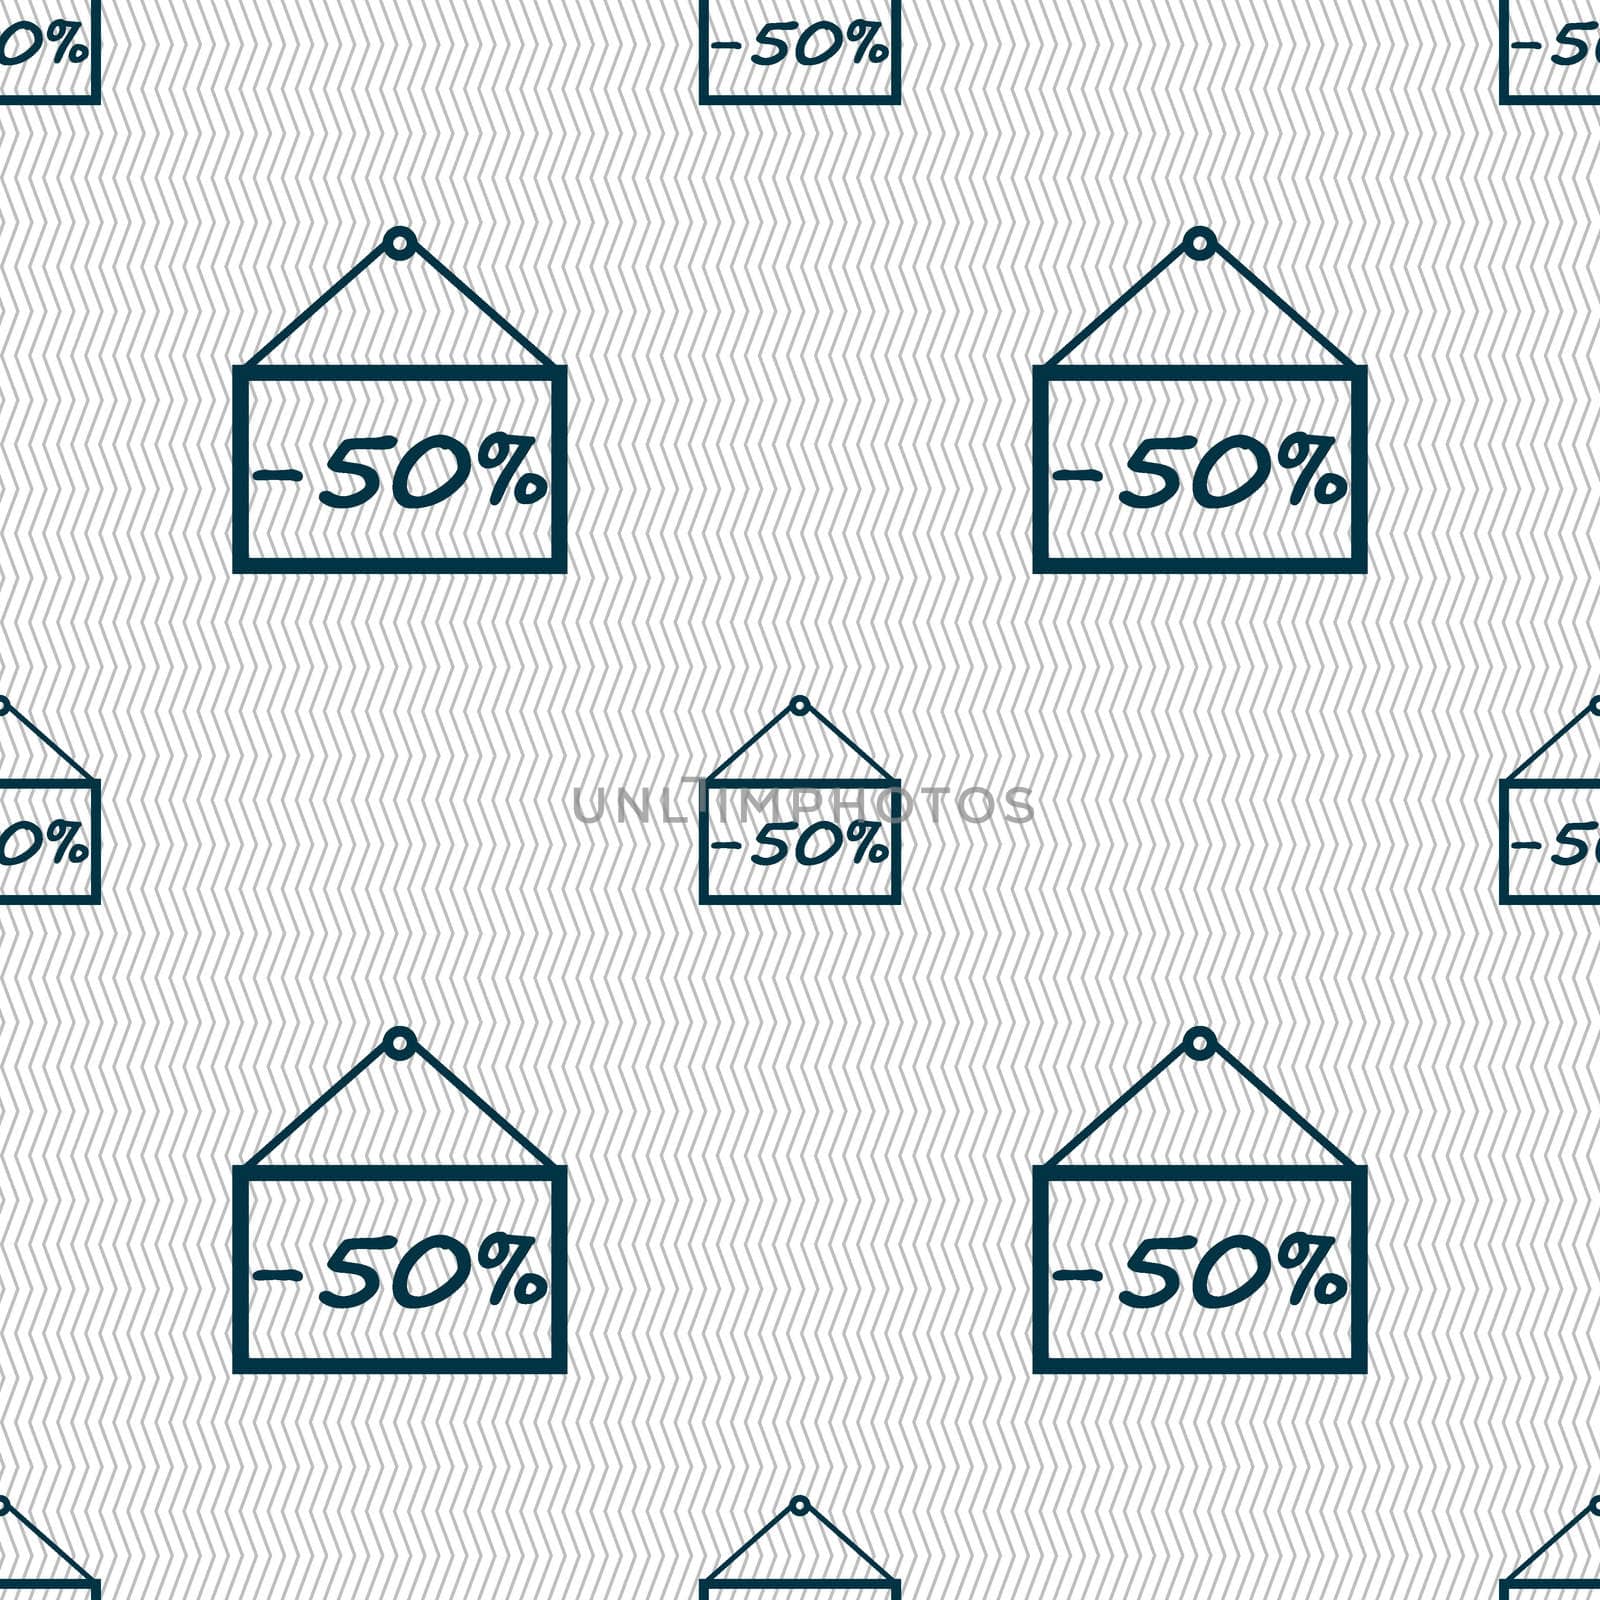 50 discount icon sign. Seamless abstract background with geometric shapes. illustration